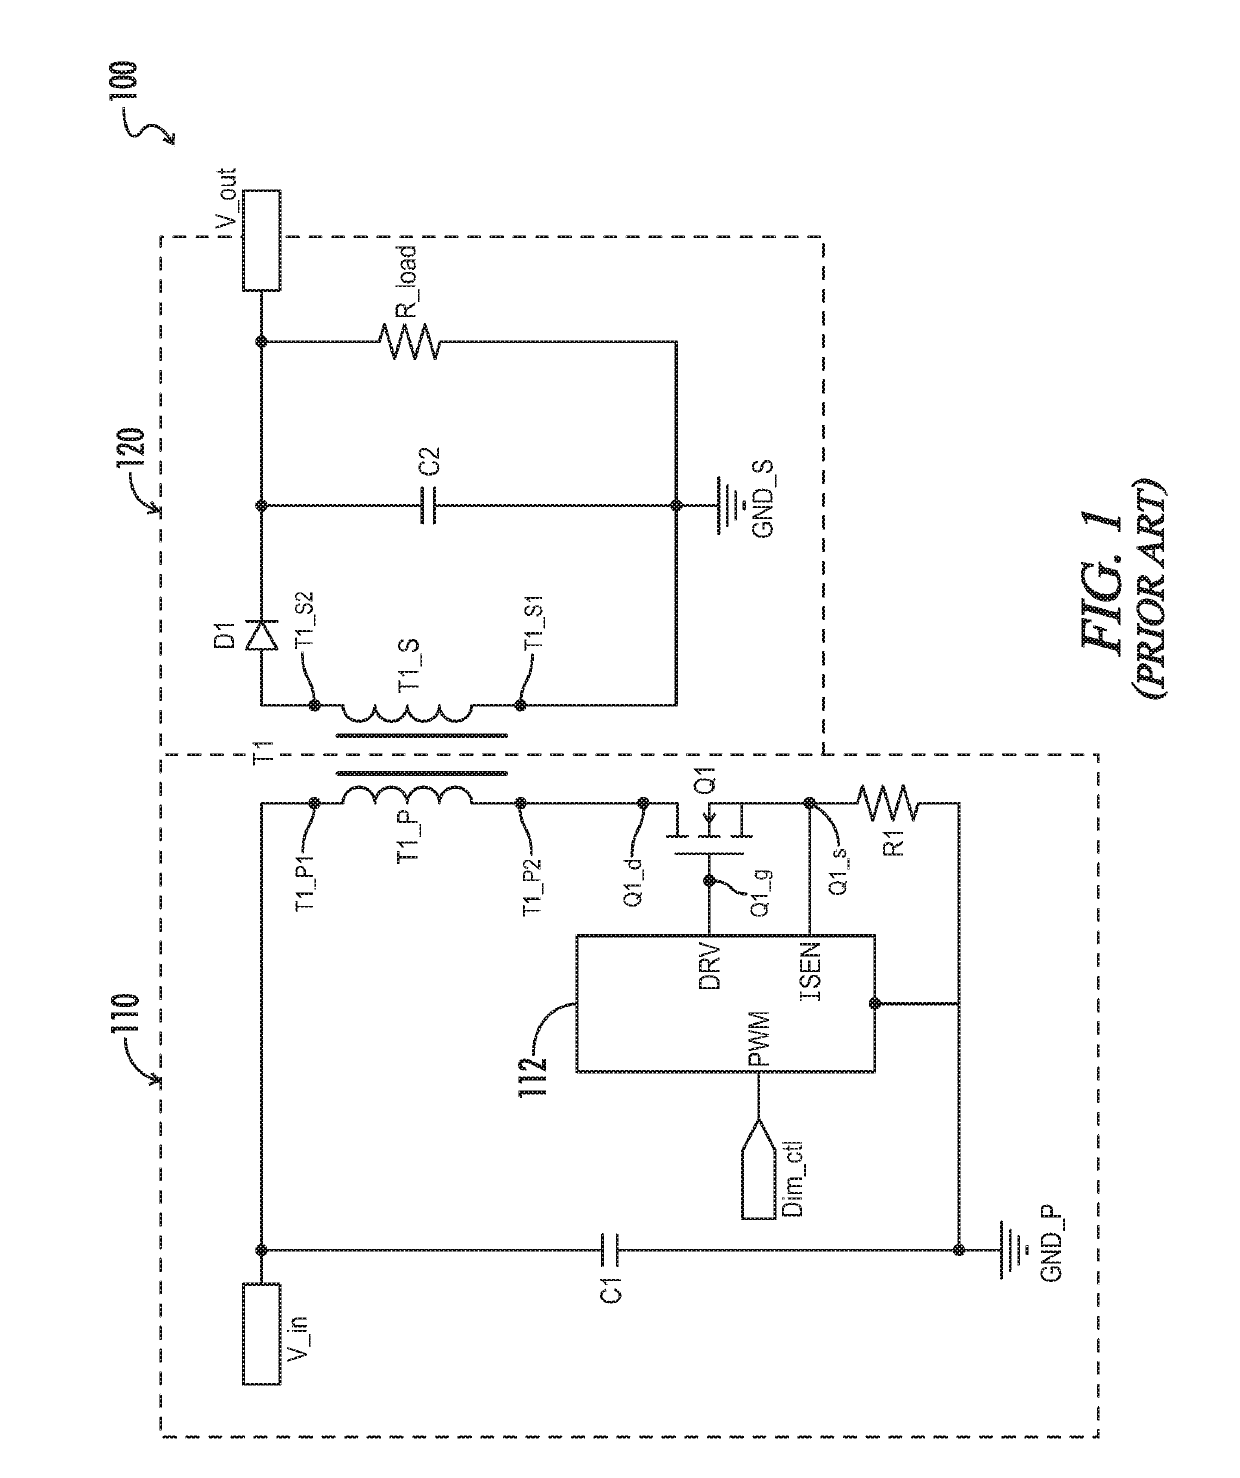 Flyback converter with load condition control circuit